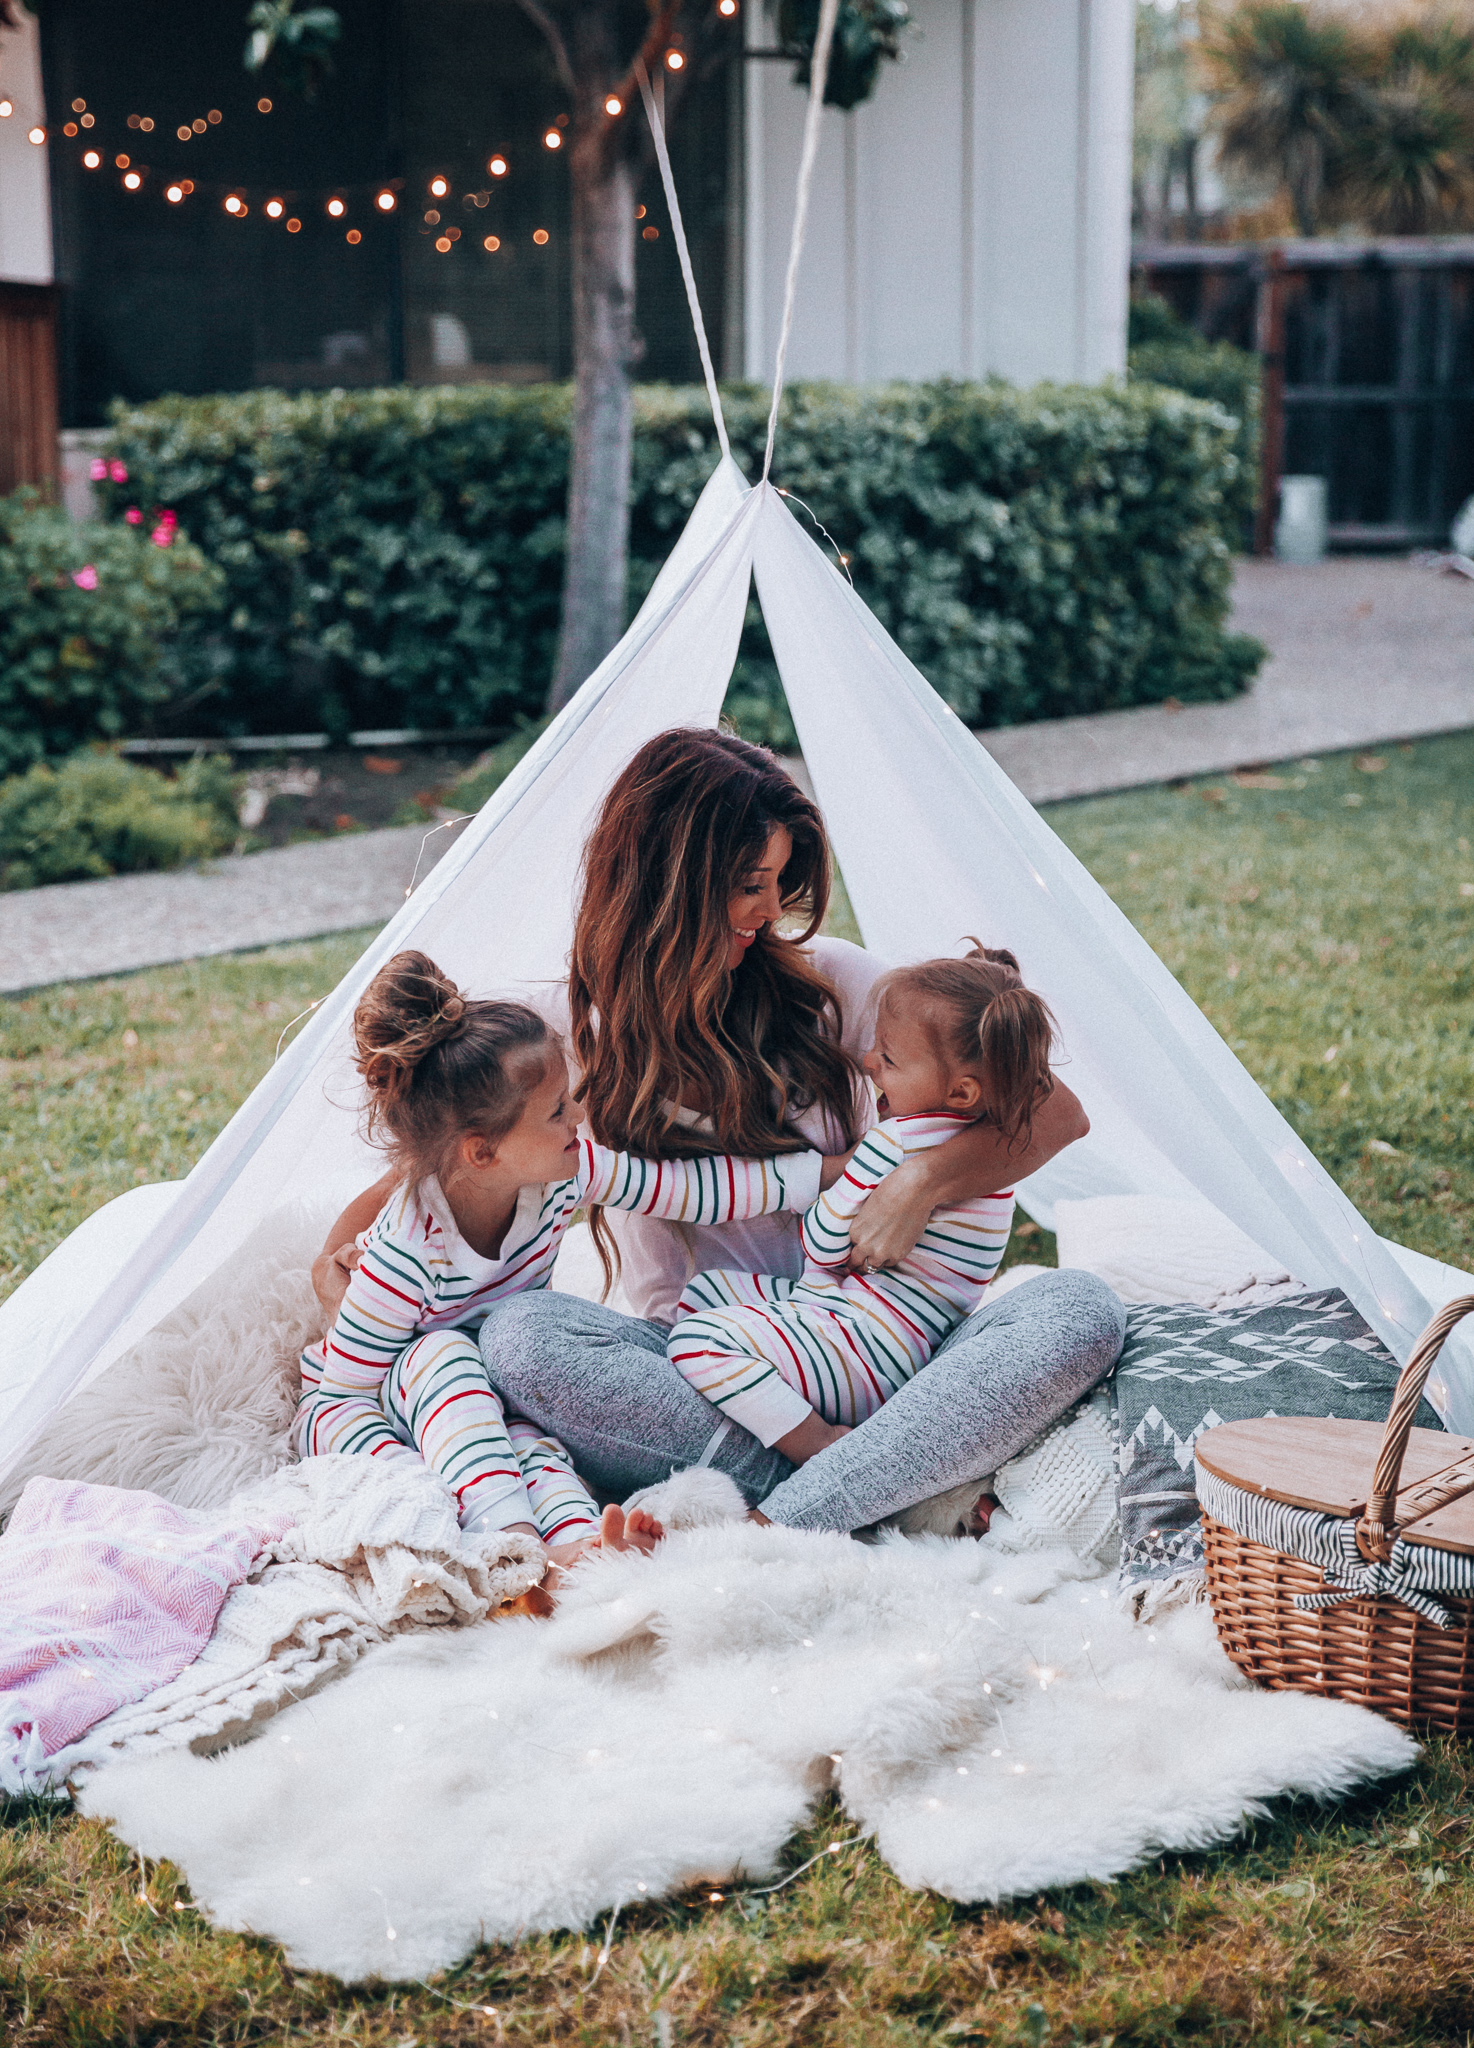 Fun Summer Activities for Kids-Part 2 by popular mom blog The Girl in the Yellow Dress: image of woman and two young girls having an outdoor picnic with their Picnic Time Country Picnic Basket in a white tent.  Woman is wearing an Ivory Aerie Arlo Pocket Tee and Aerie Plush Harem Jogger.  The two young girls are wearing Hanna Andersson Long John Pajamas In Organic Cotton.